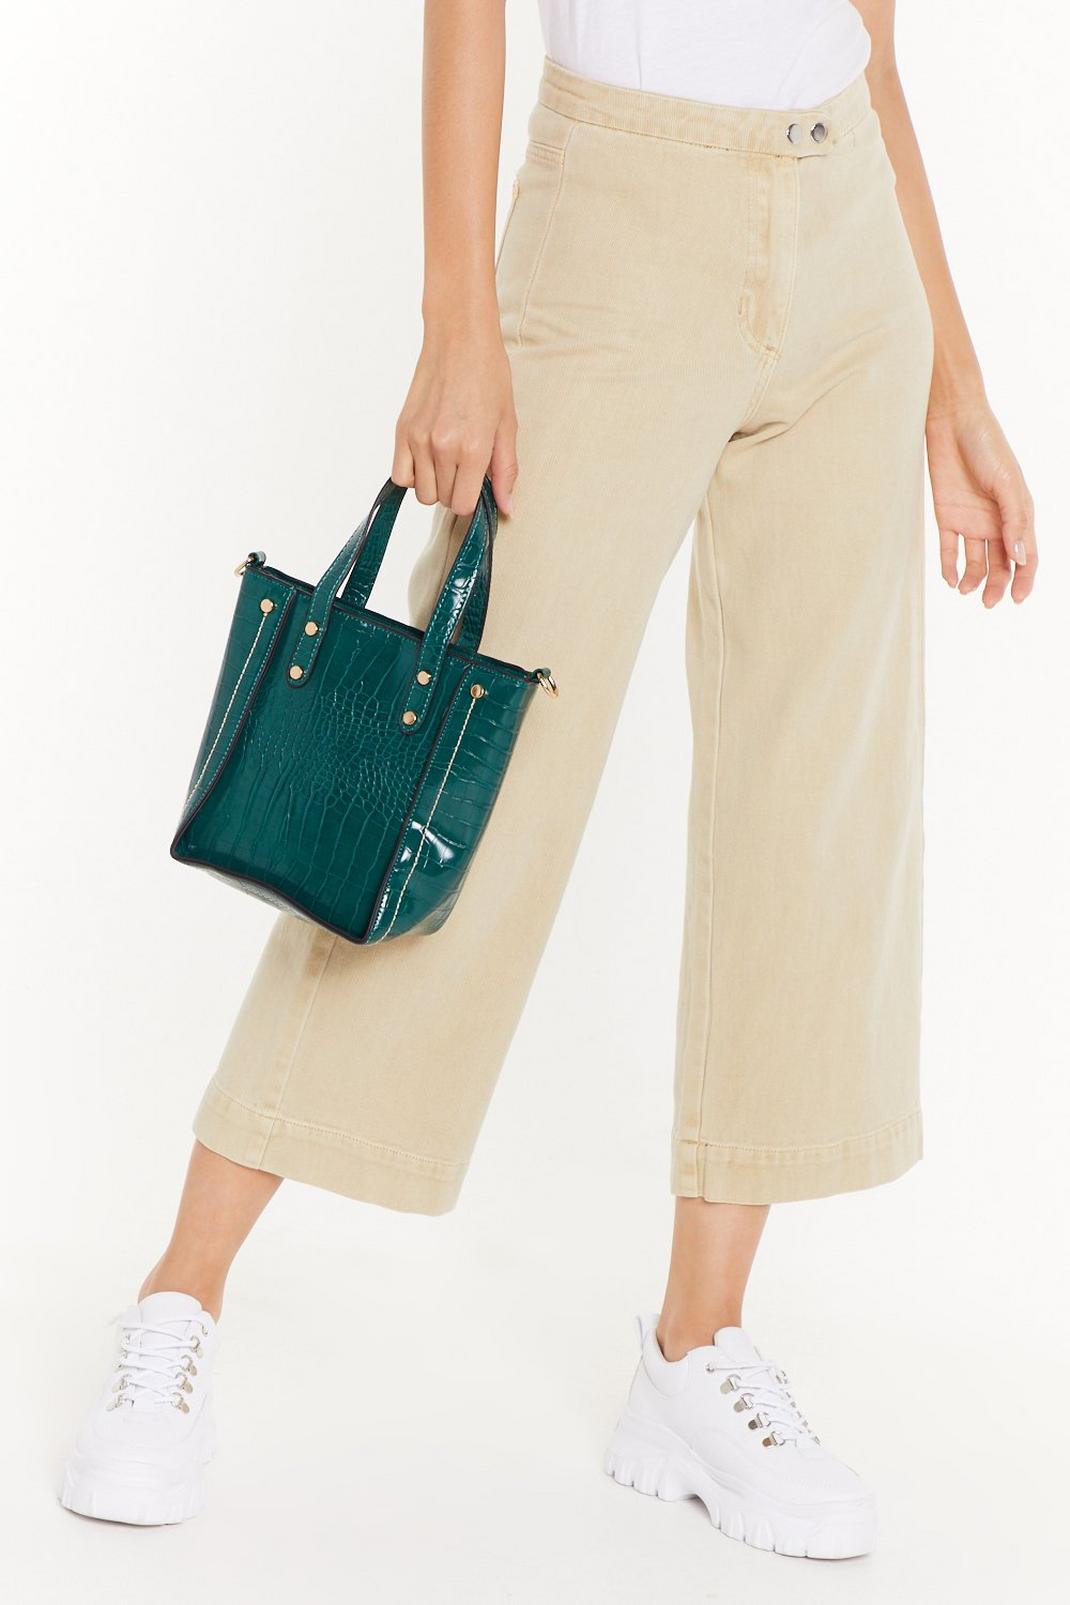 WANT Structured in Place Croc Faux Leather Bag image number 1